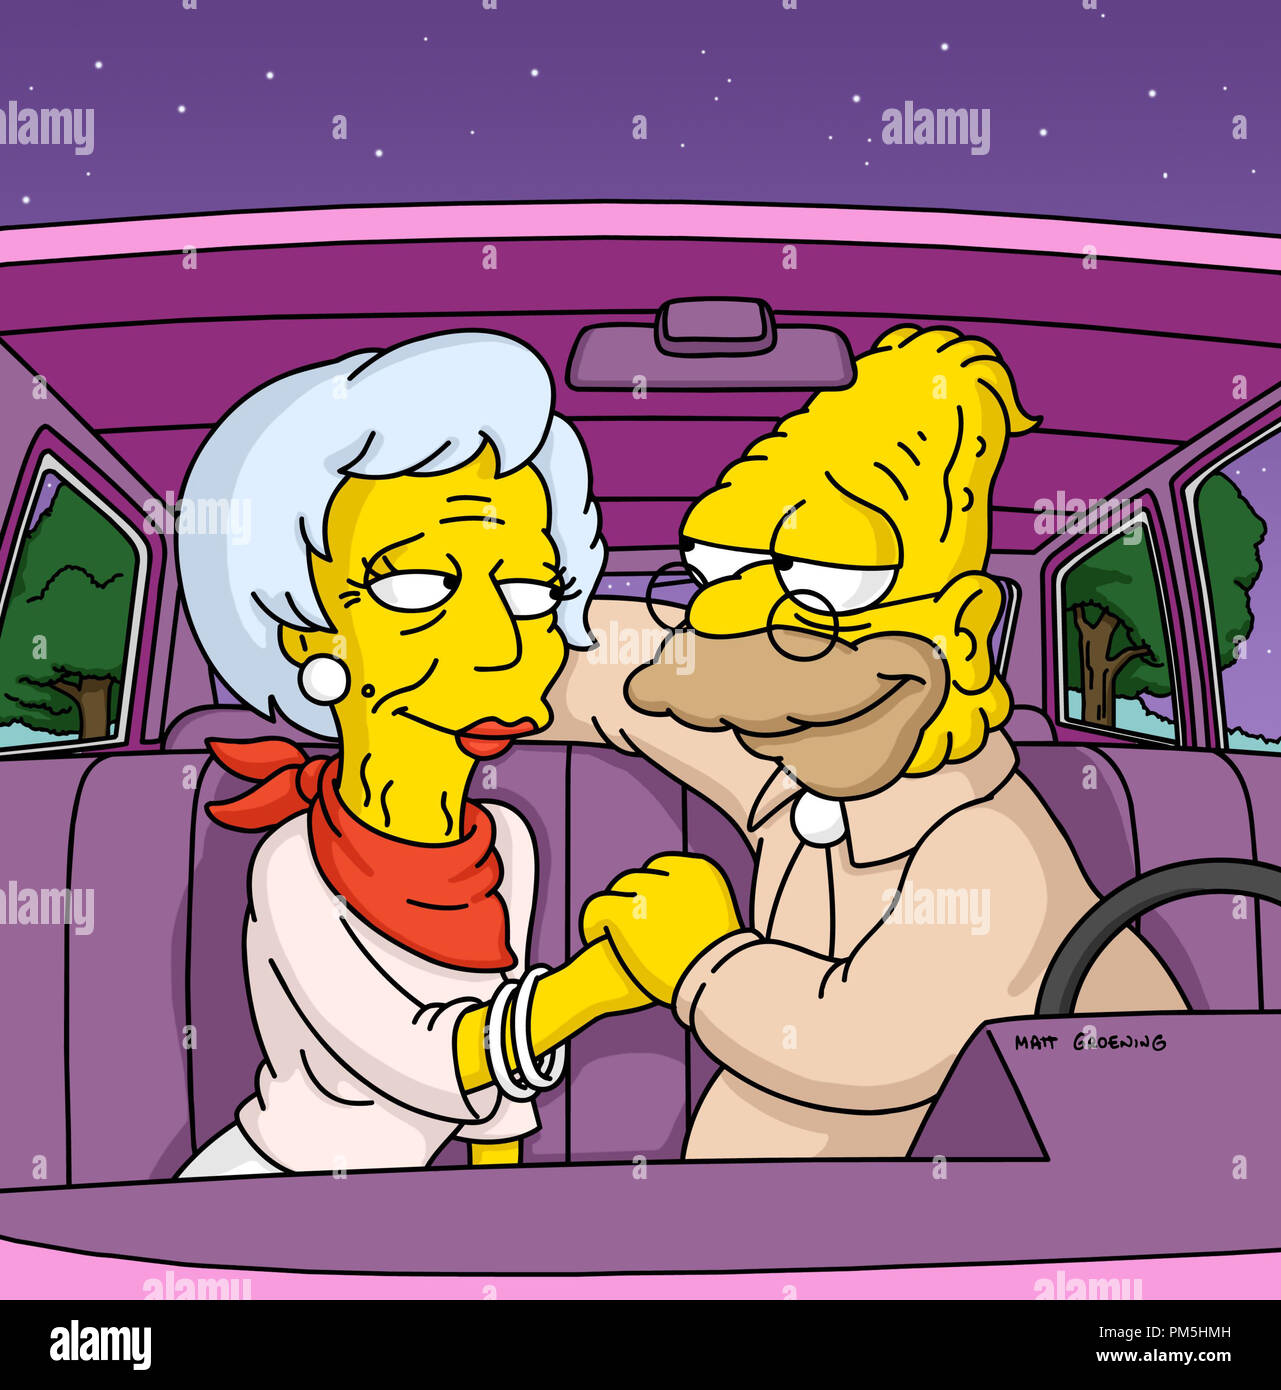 Film Still / Publicity Still from 'The Simpsons' Episode: 'The Old Man and the Key' Zelda, Abe Simpson March 10, 2002  File Reference # 30754260THA  For Editorial Use Only -  All Rights Reserved Stock Photo